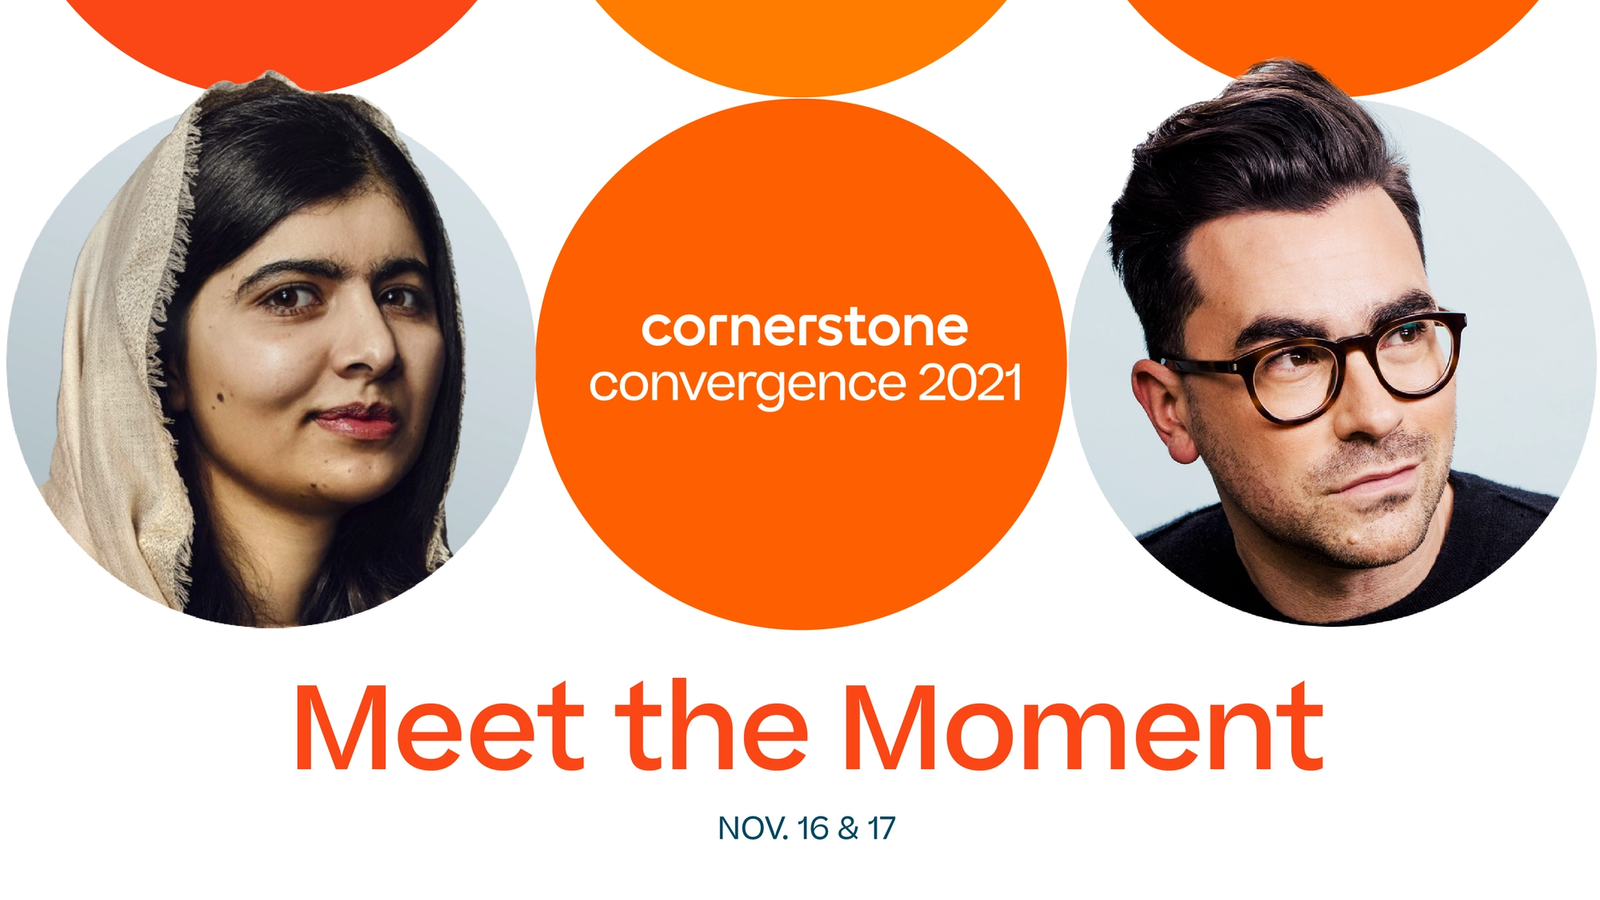 Announcing the Convergence 2021 featured speakers: Dan Levy and Malala Yousafzai